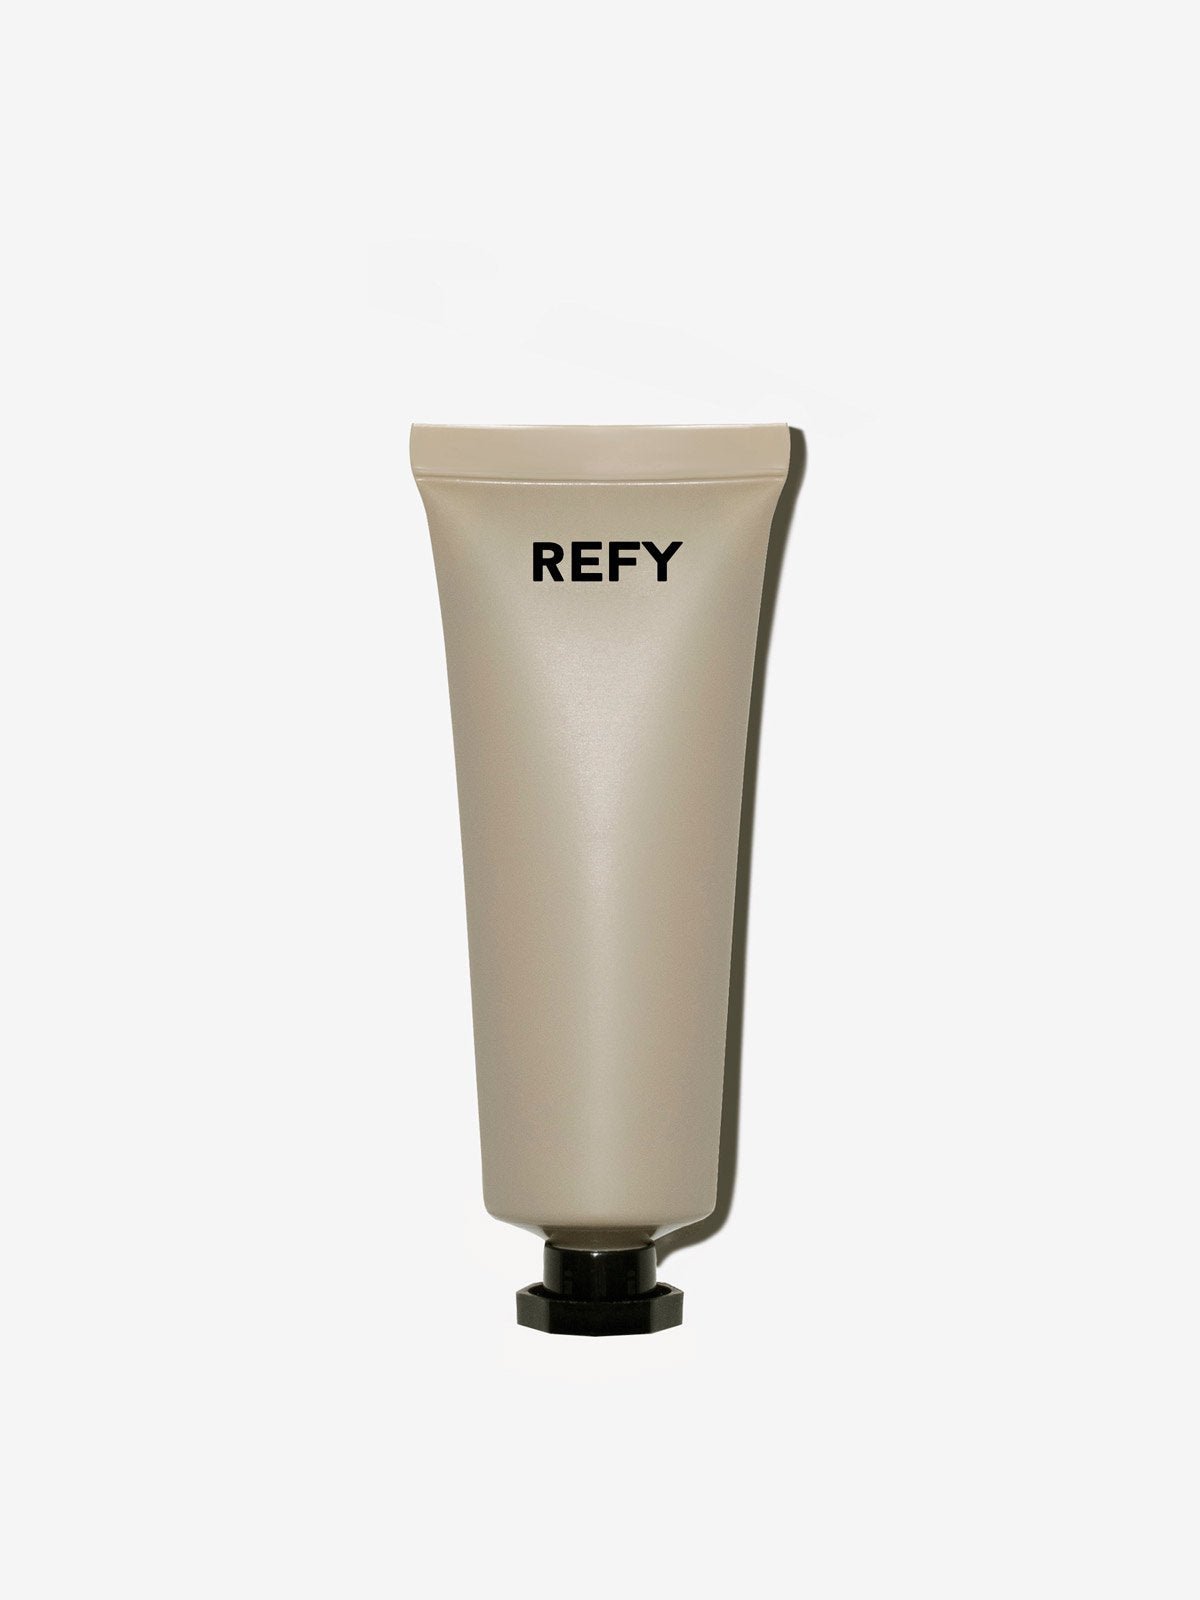 FRONT IMAGE OF REFY GLOSS HIGHLIGHTER IN SHADE TOPAZ.